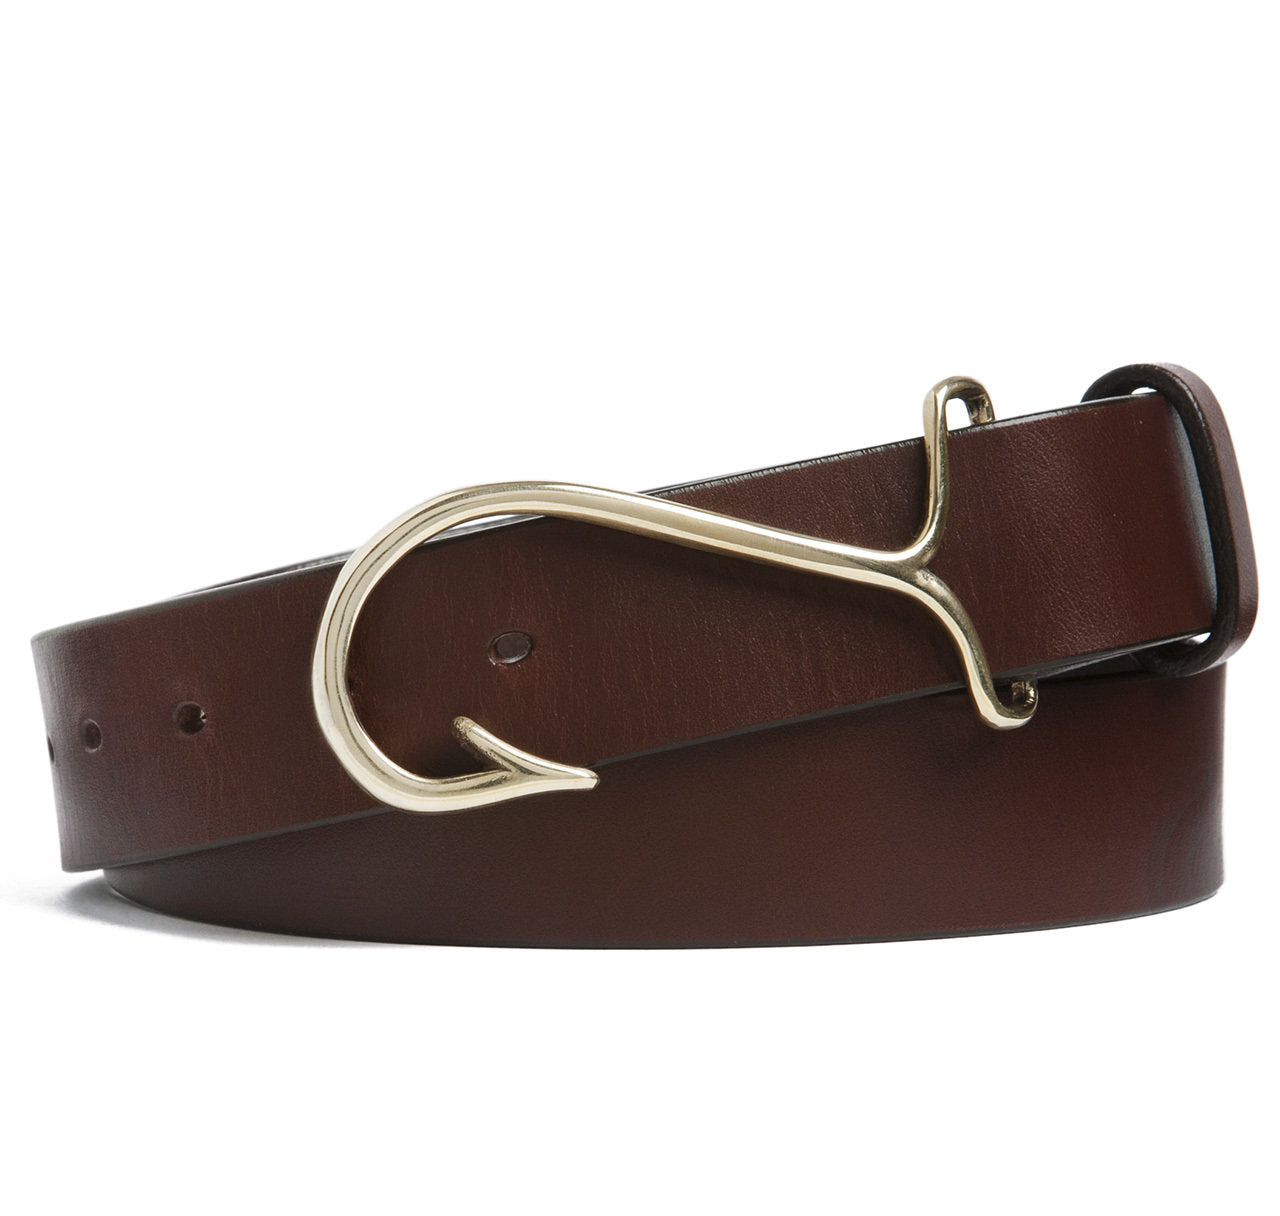 Sir Jack's Fish Hook Buckle with Brown Leather Belt